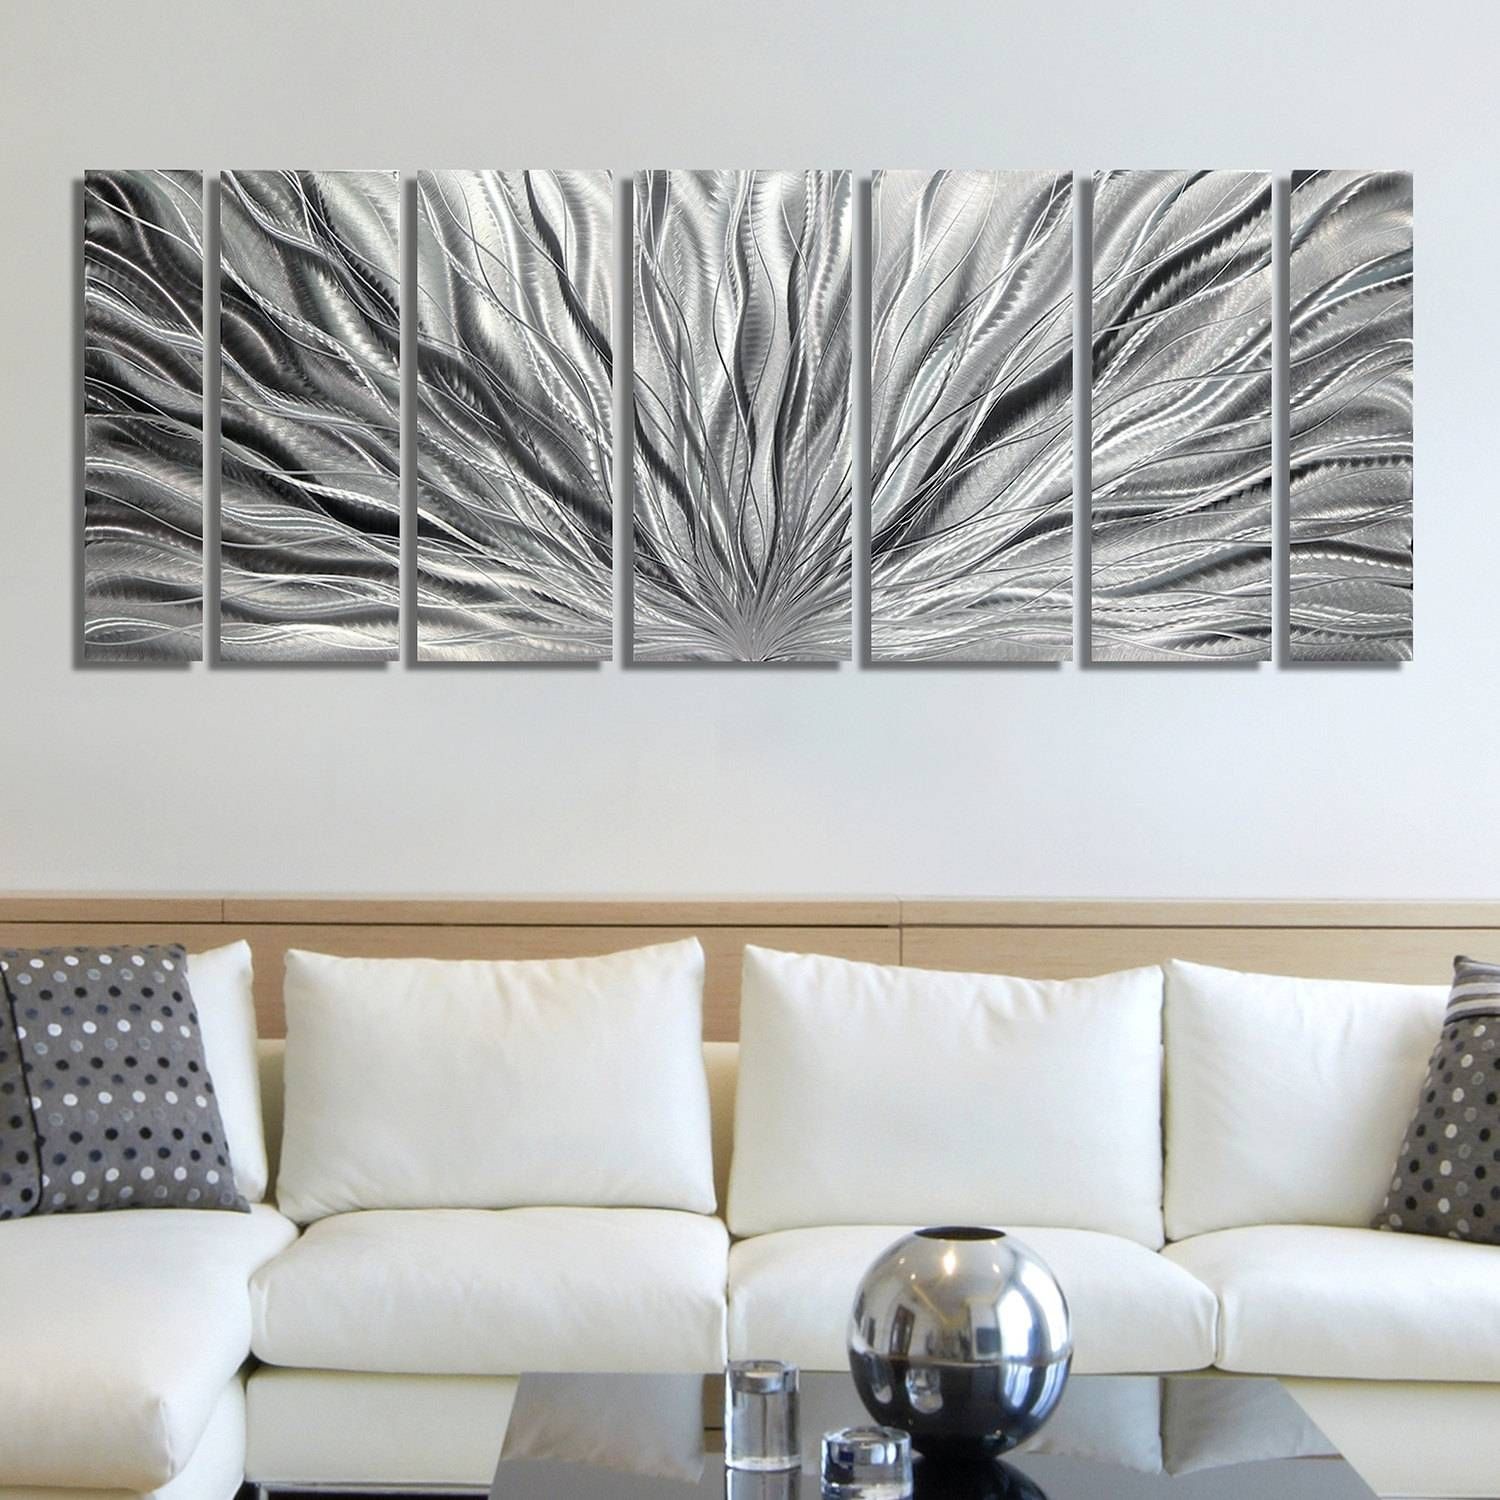 Sale Large Multi Panel Metal Wall Art In All Silver With Regard To 2018 Modern Wall Art For Sale (View 5 of 20)